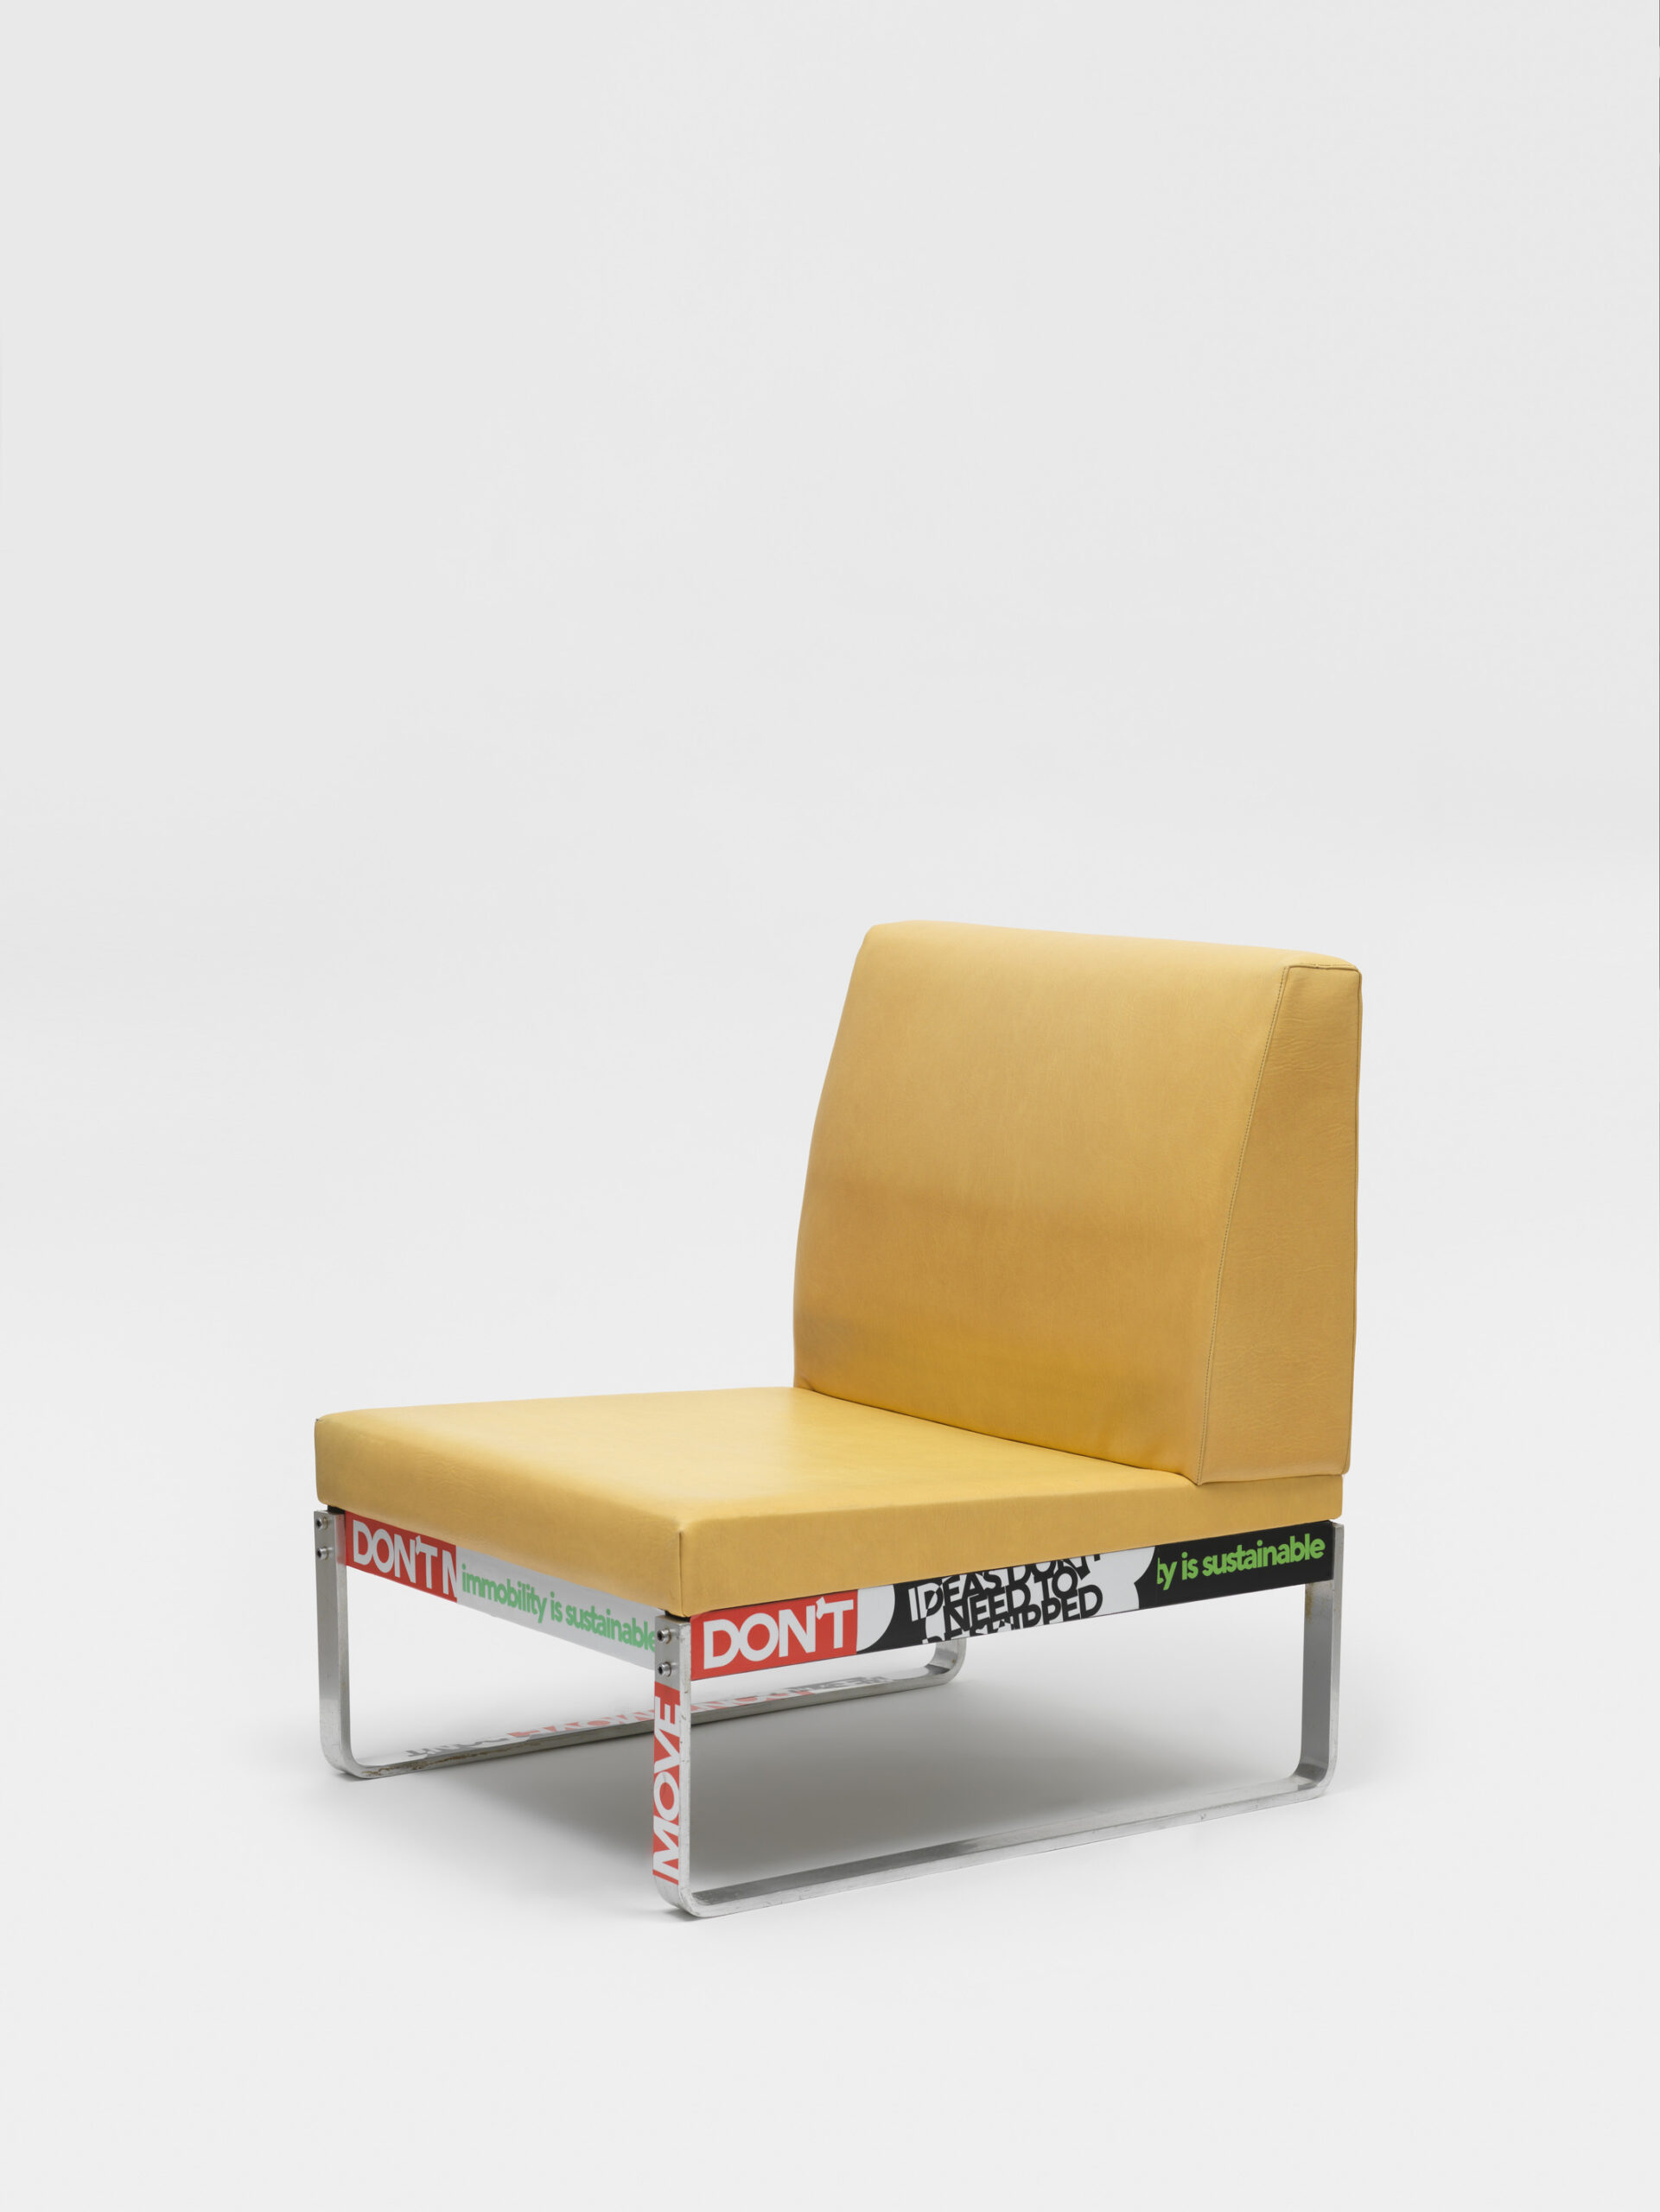 Product image: Tsaousoglou Chair, modified by Vasso & Evi, claim stickers, 2022 Athens, 4.6 tons